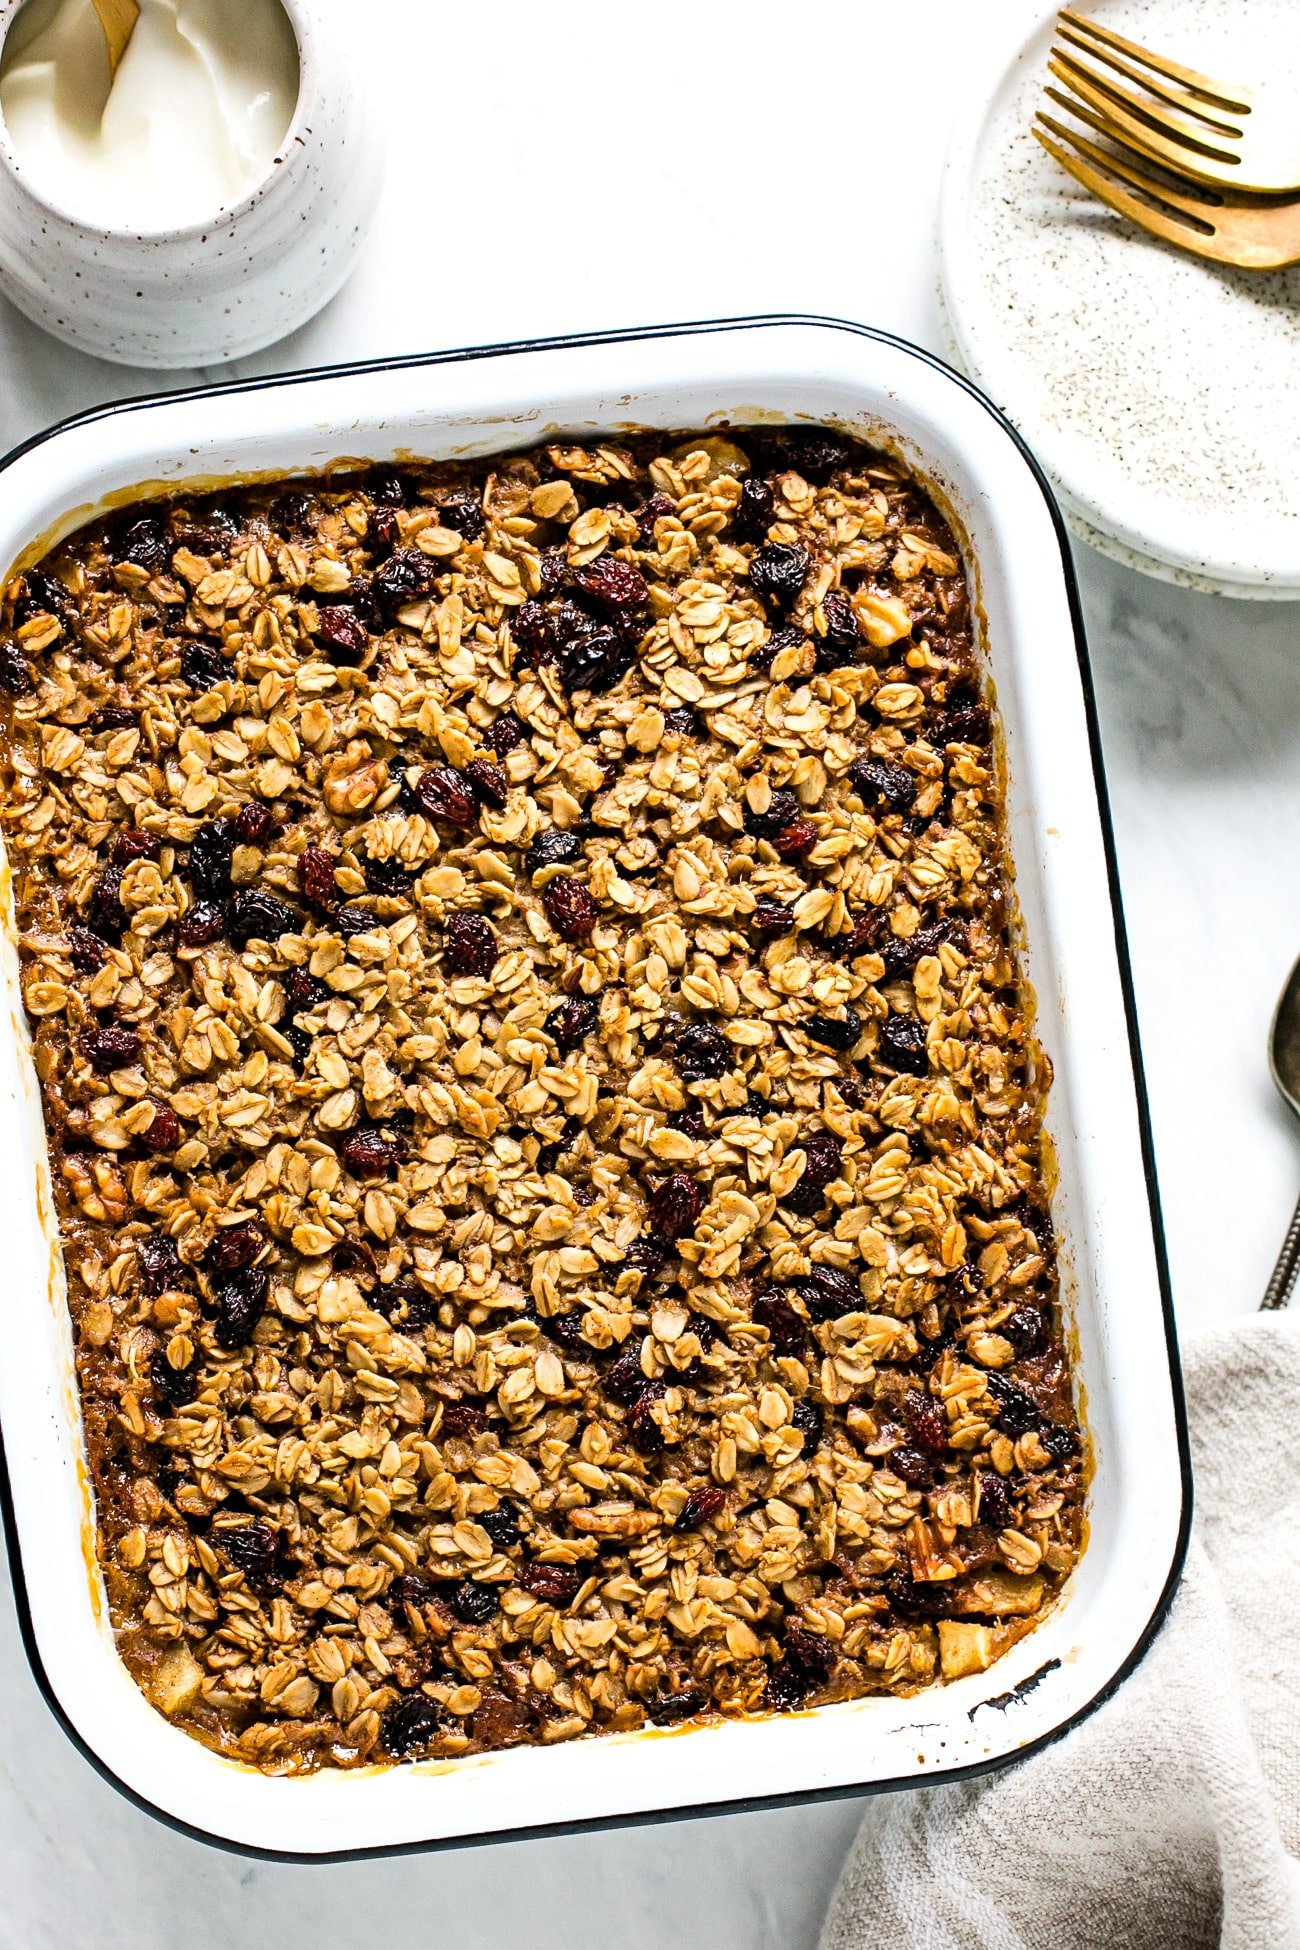 Baked oatmeal with apple and raisins.